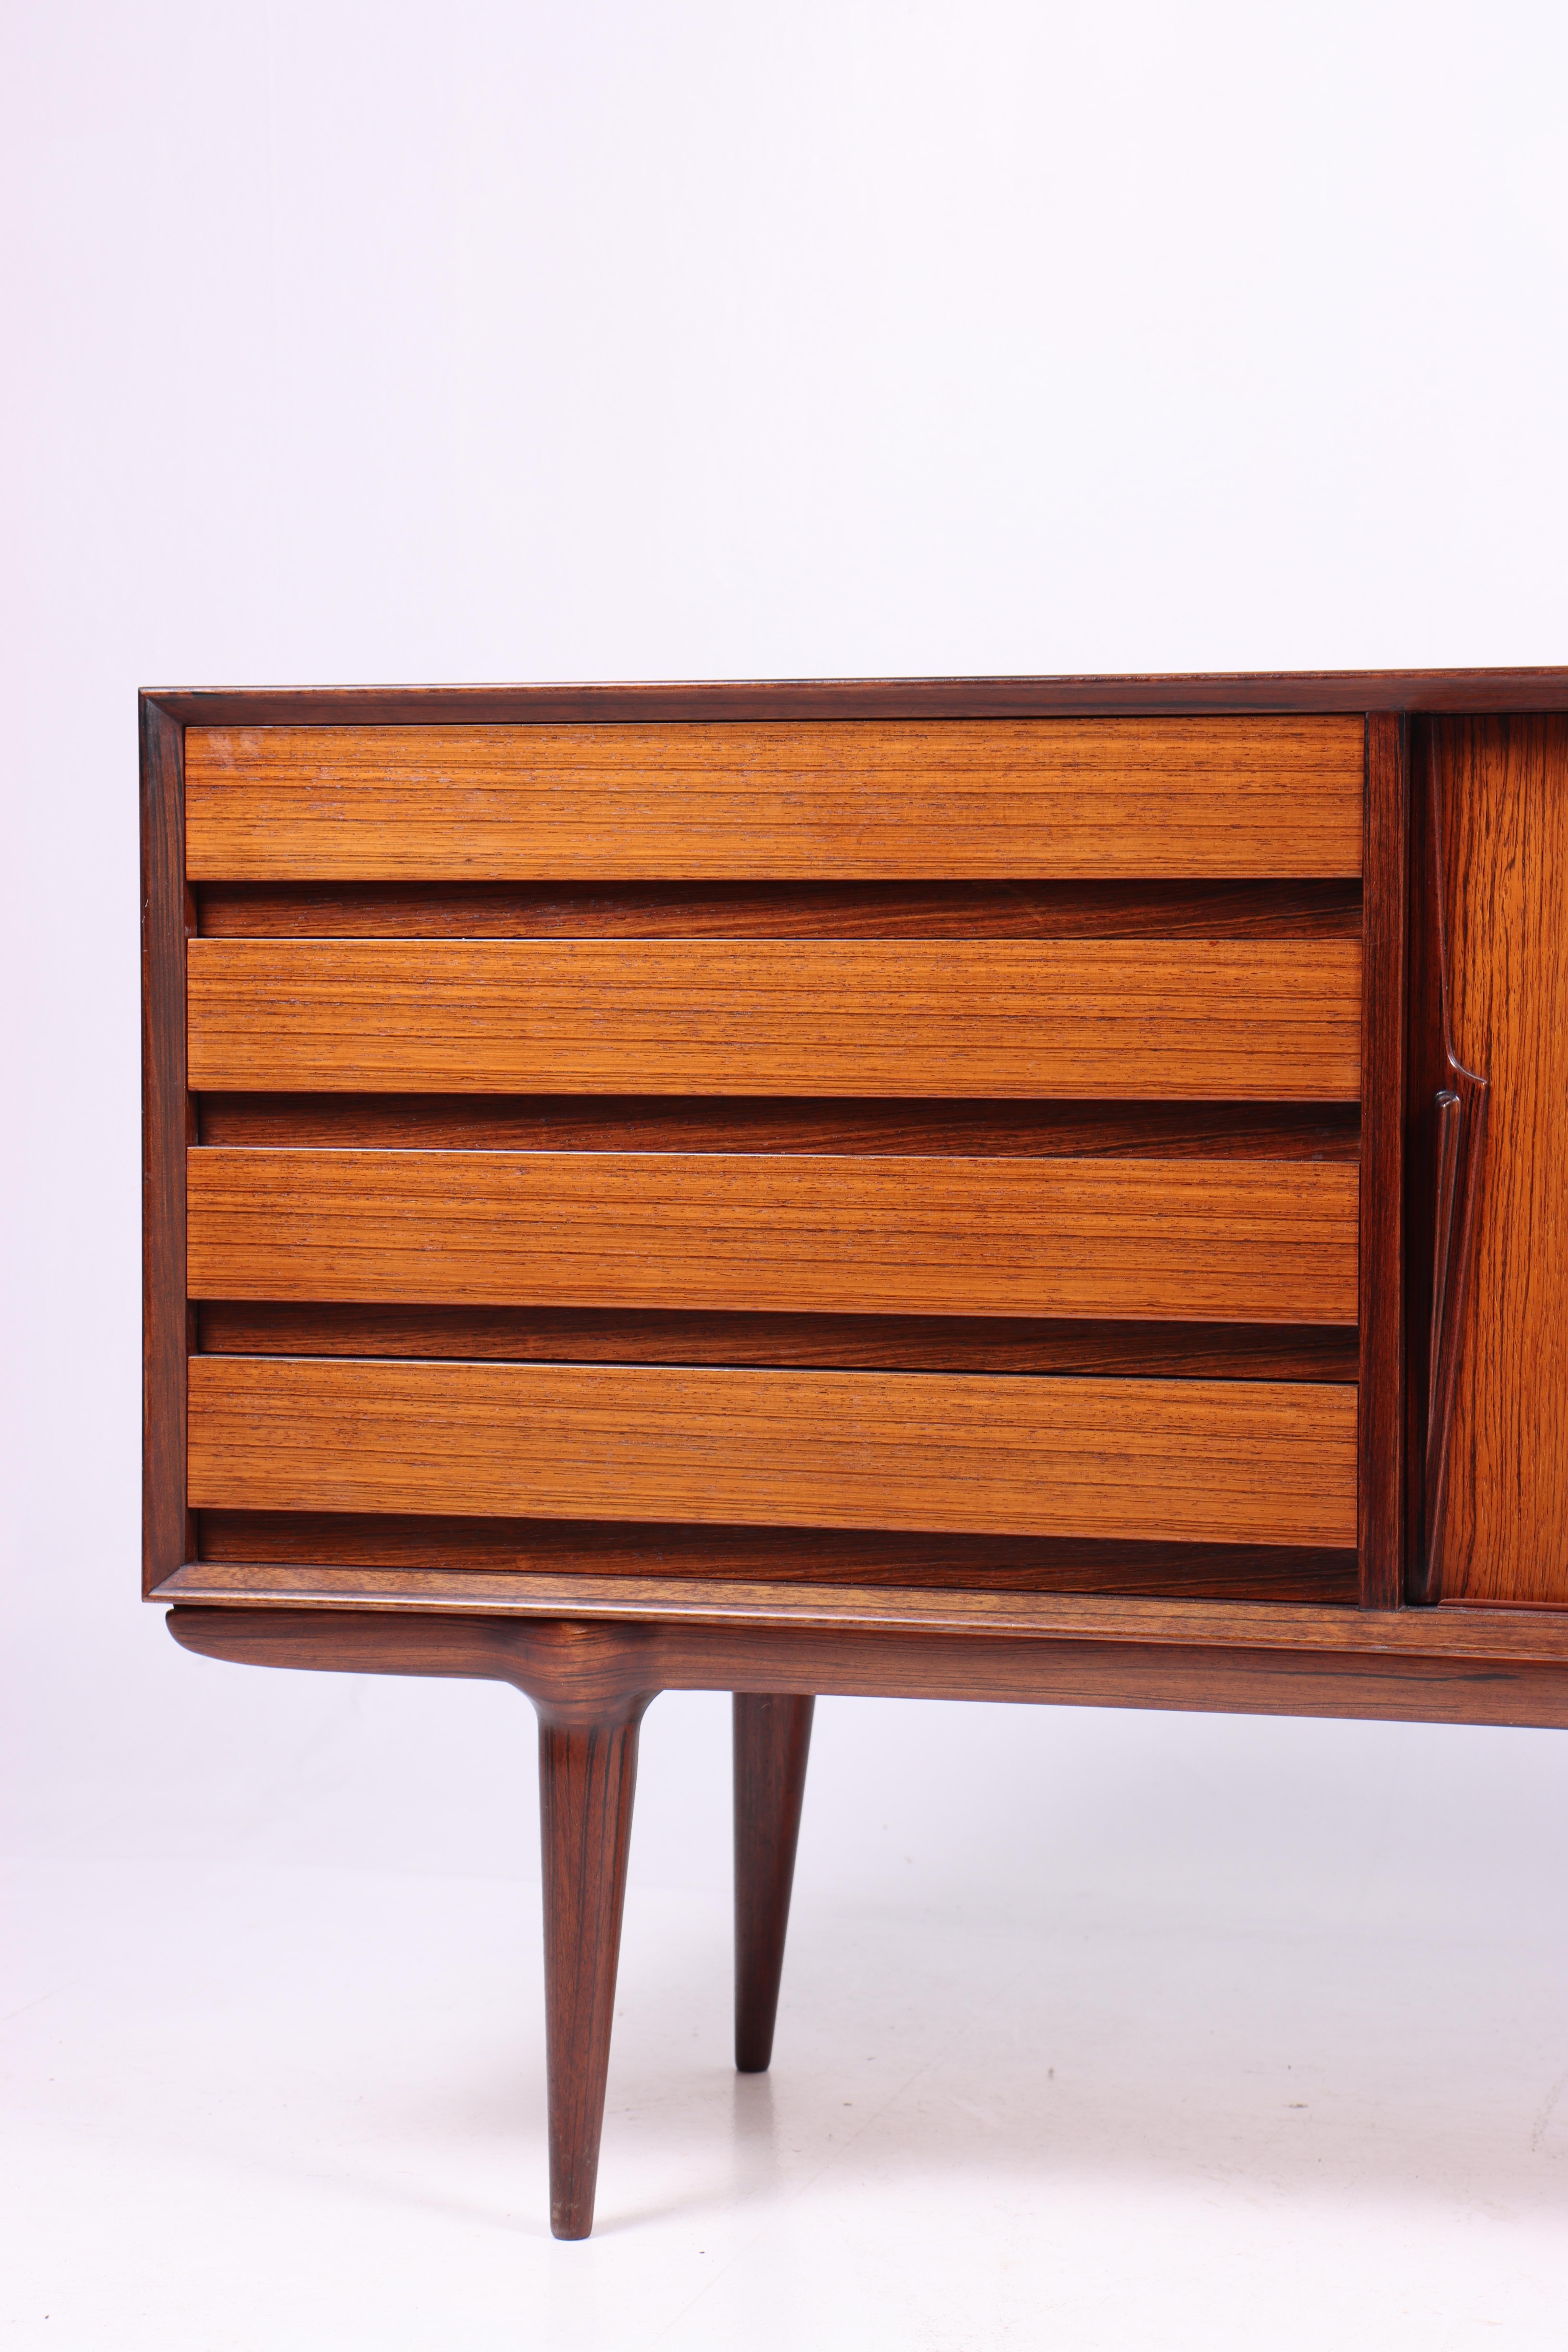 Mid-Century Modern Midcentury Sideboard in Rosewood by Omann Jun, 1950s For Sale